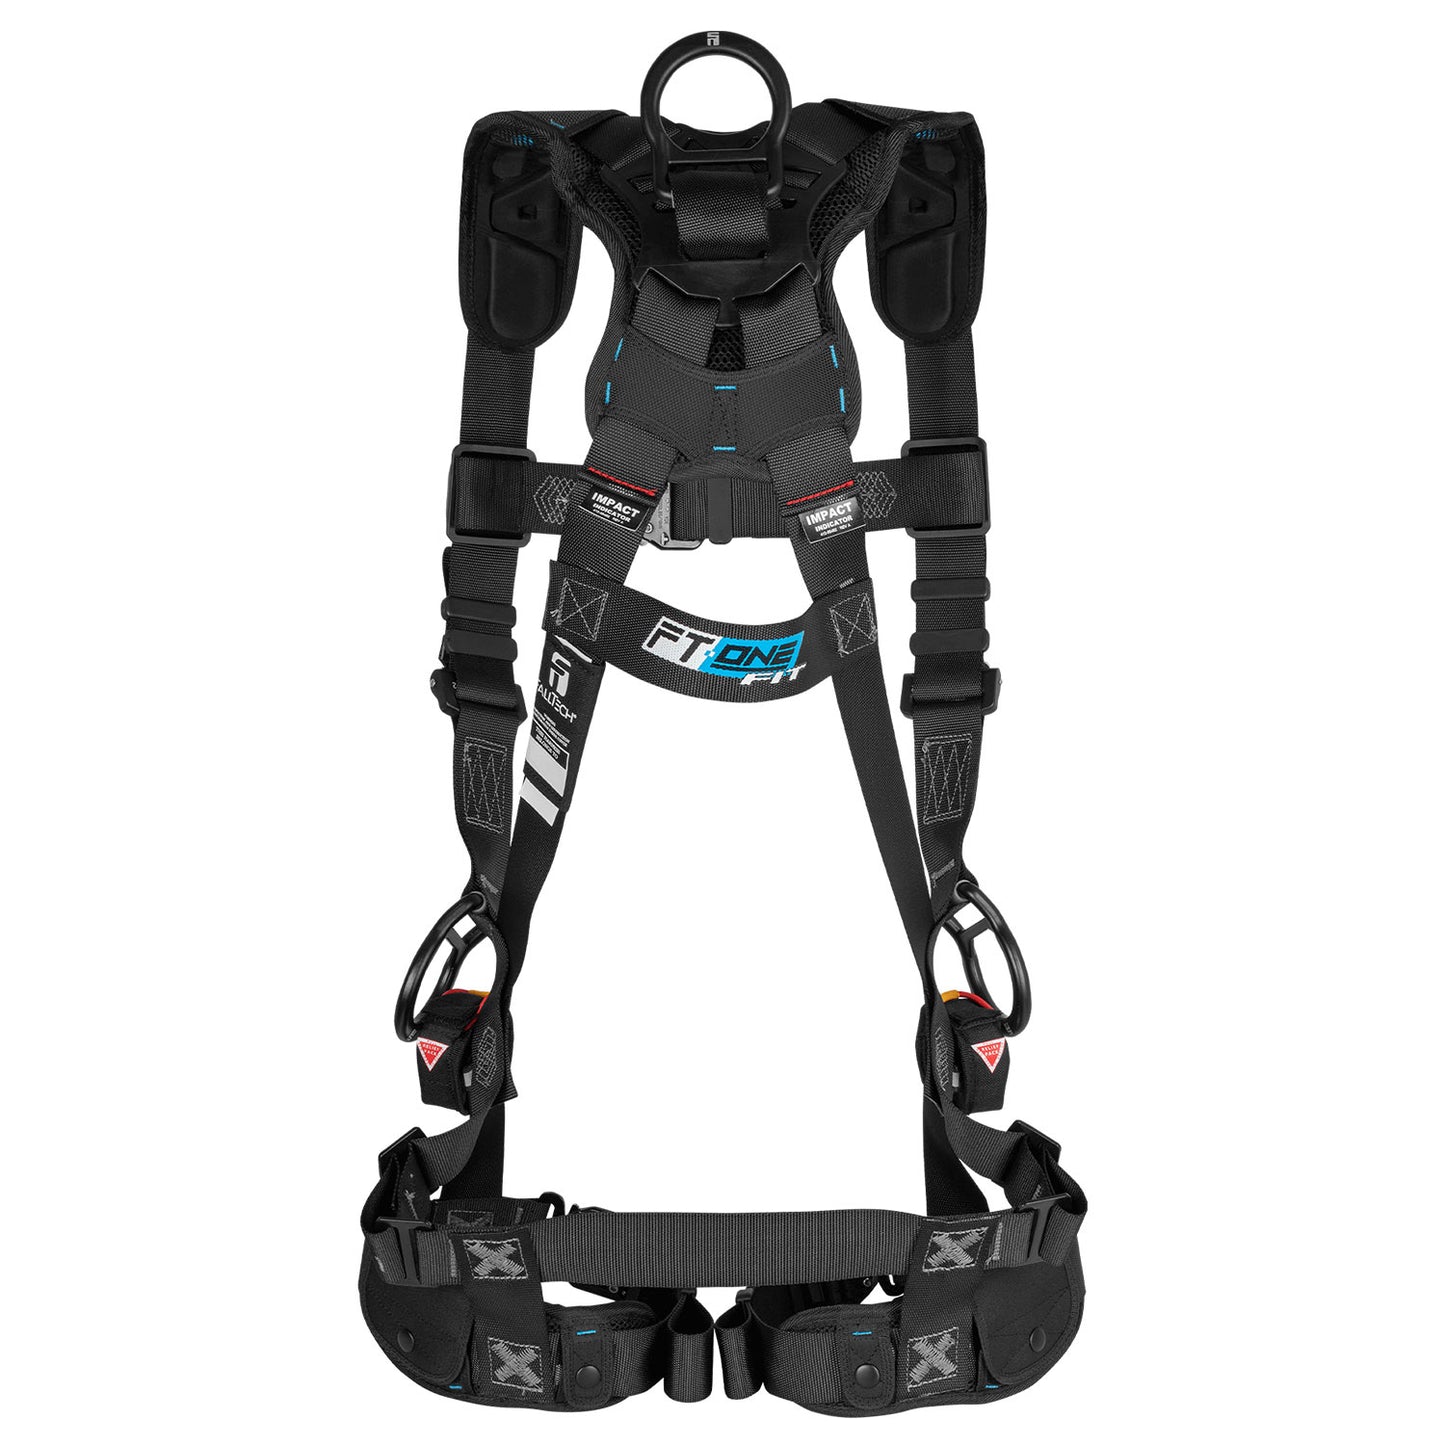 FallTech FT-One Fit Women's Safety Harness w/ Trauma Straps | Non-Belted | M | 81293DQCM